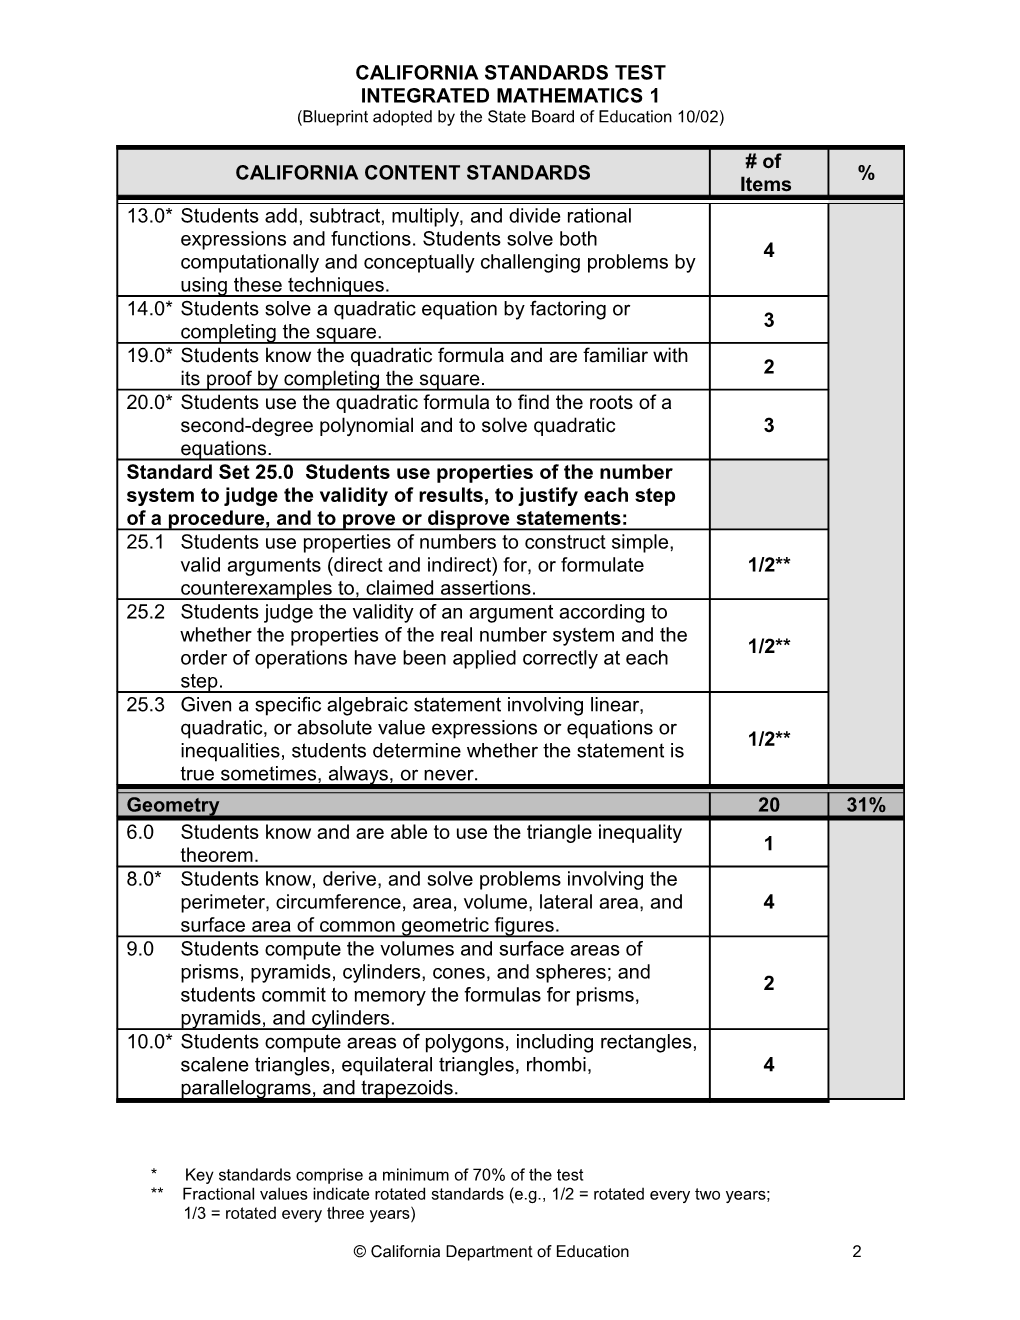 Integrated Mathematics 1 CST - Standardized Testing and Reporting (CA Dept of Education)